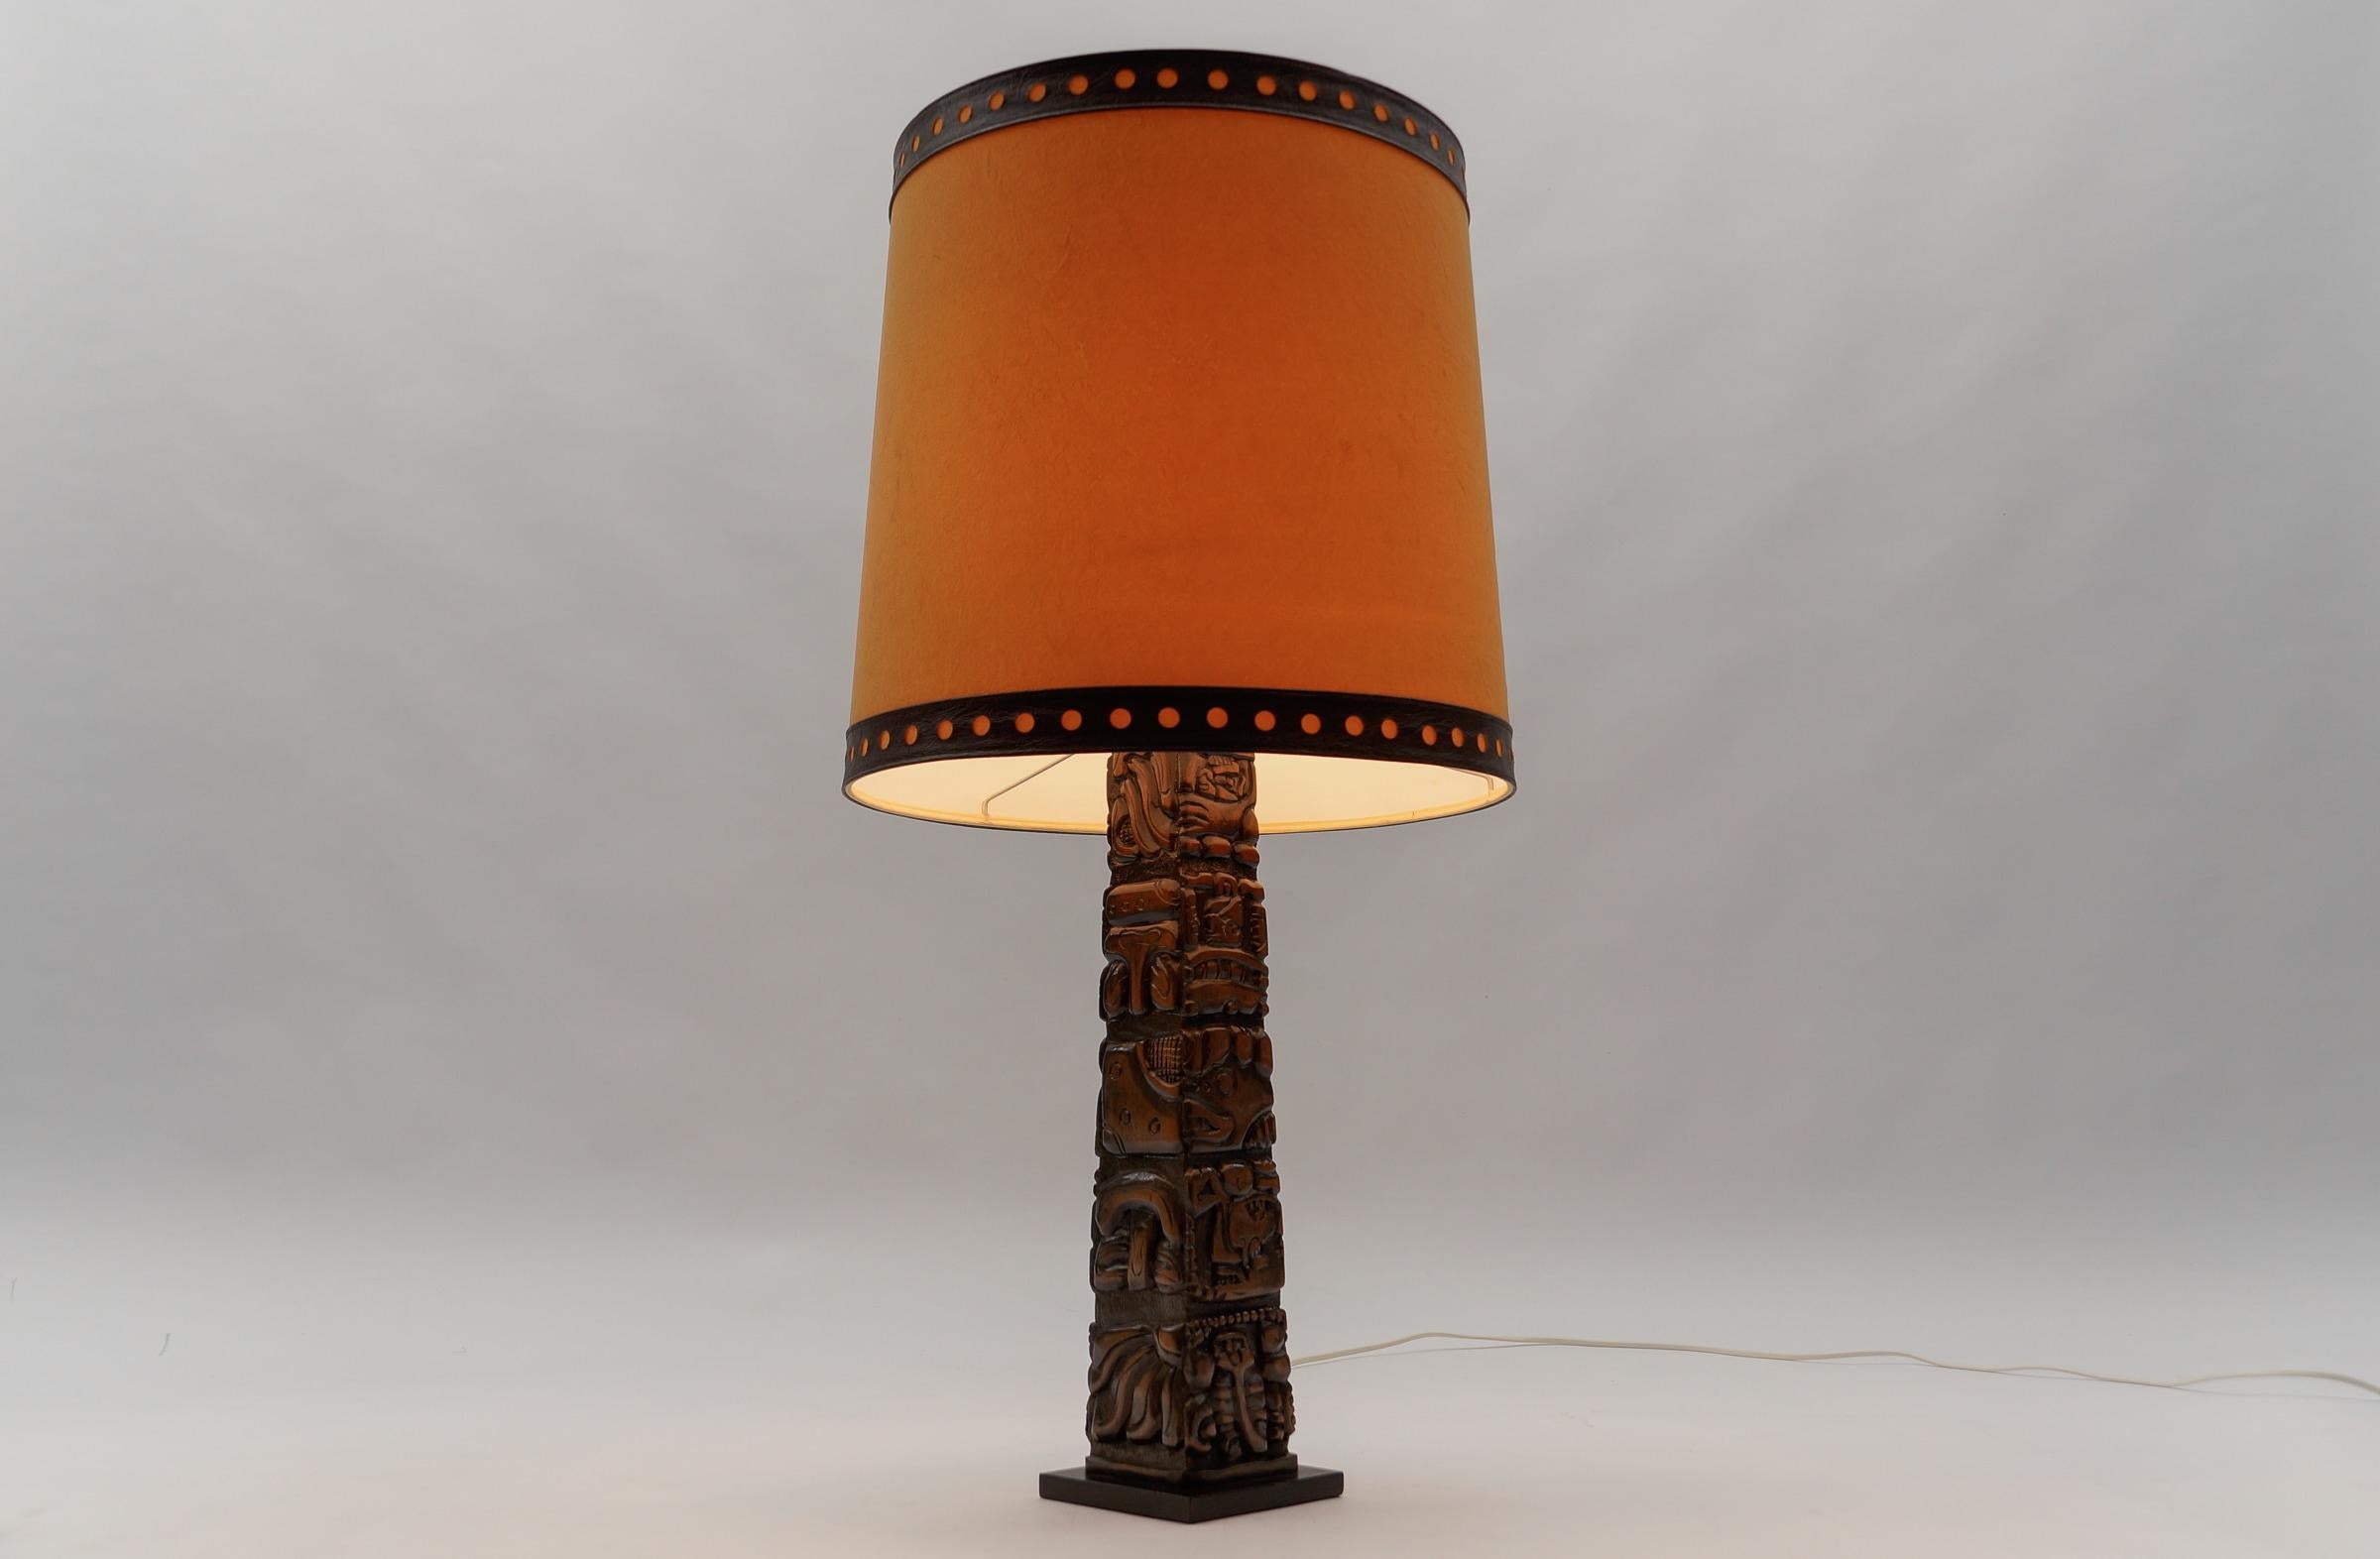 Swiss Hand Carved Wooden Mayan Totem Table Lamp by Temde Honduras, Switzerland 1960s For Sale